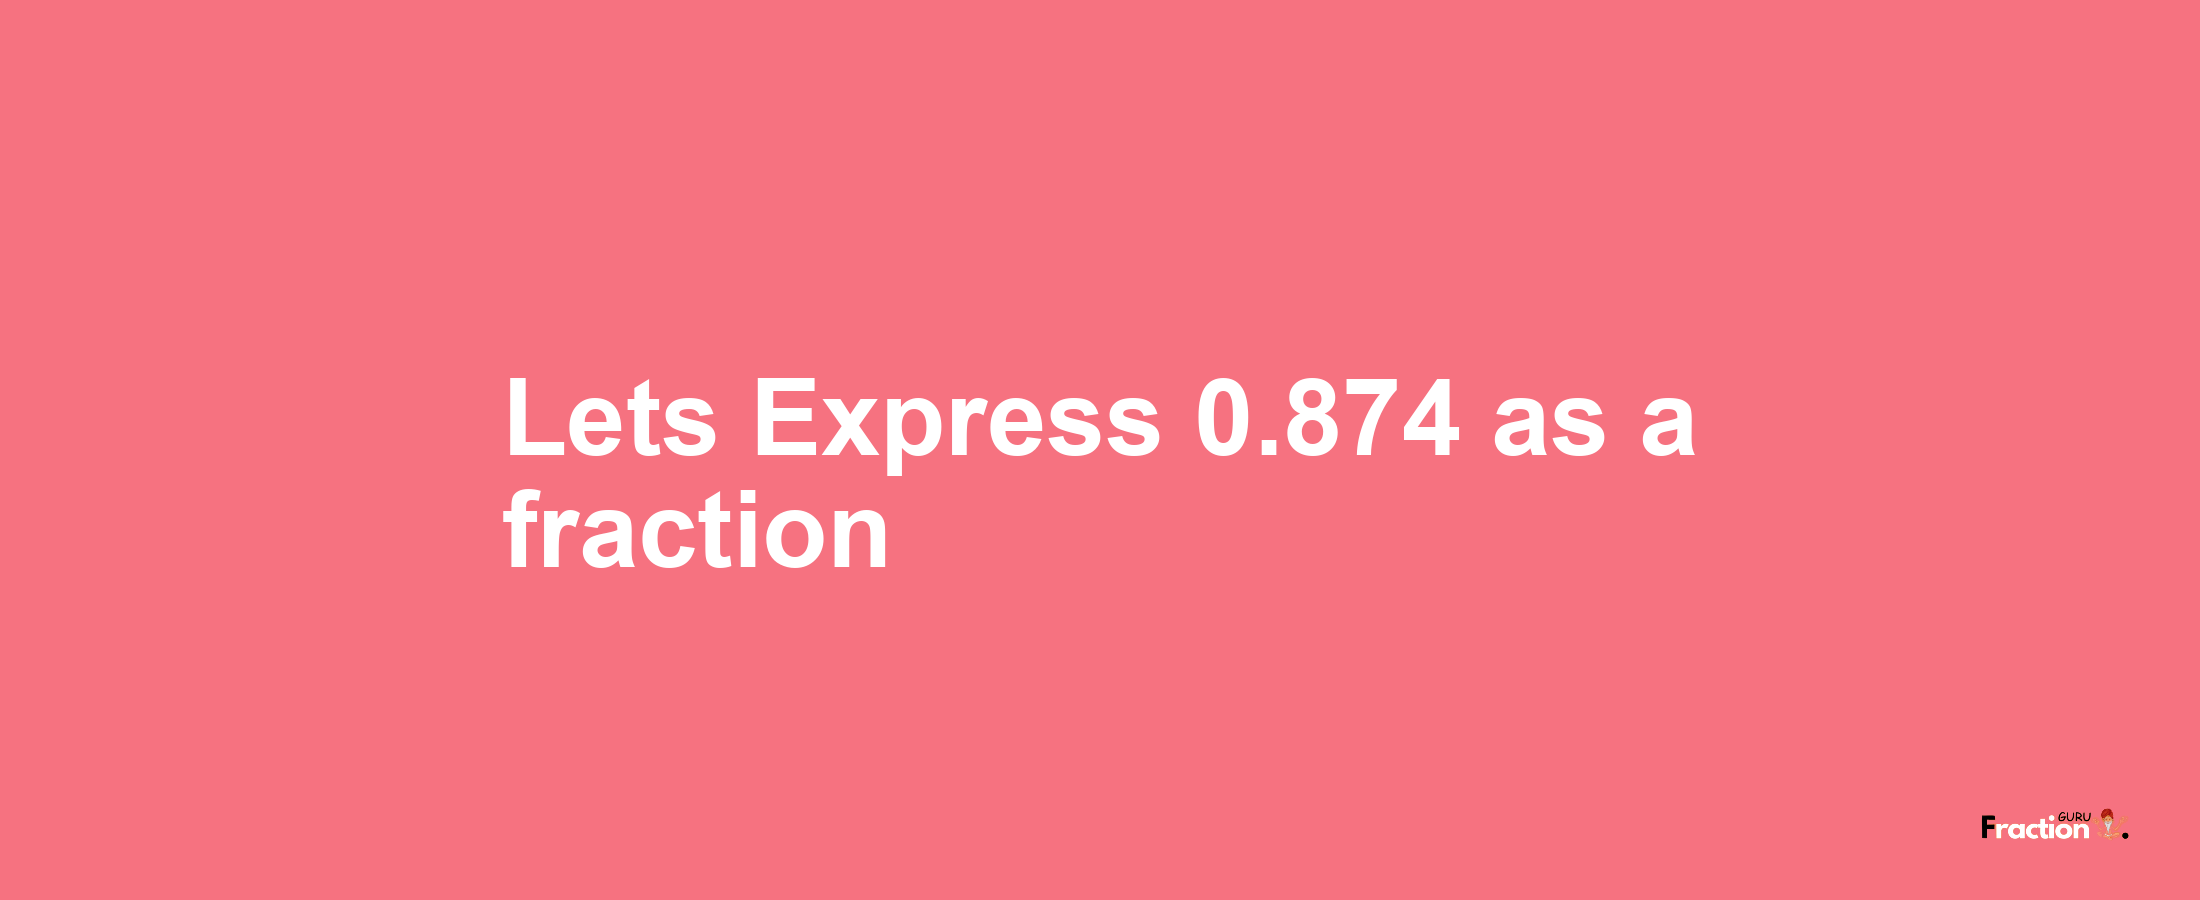 Lets Express 0.874 as afraction